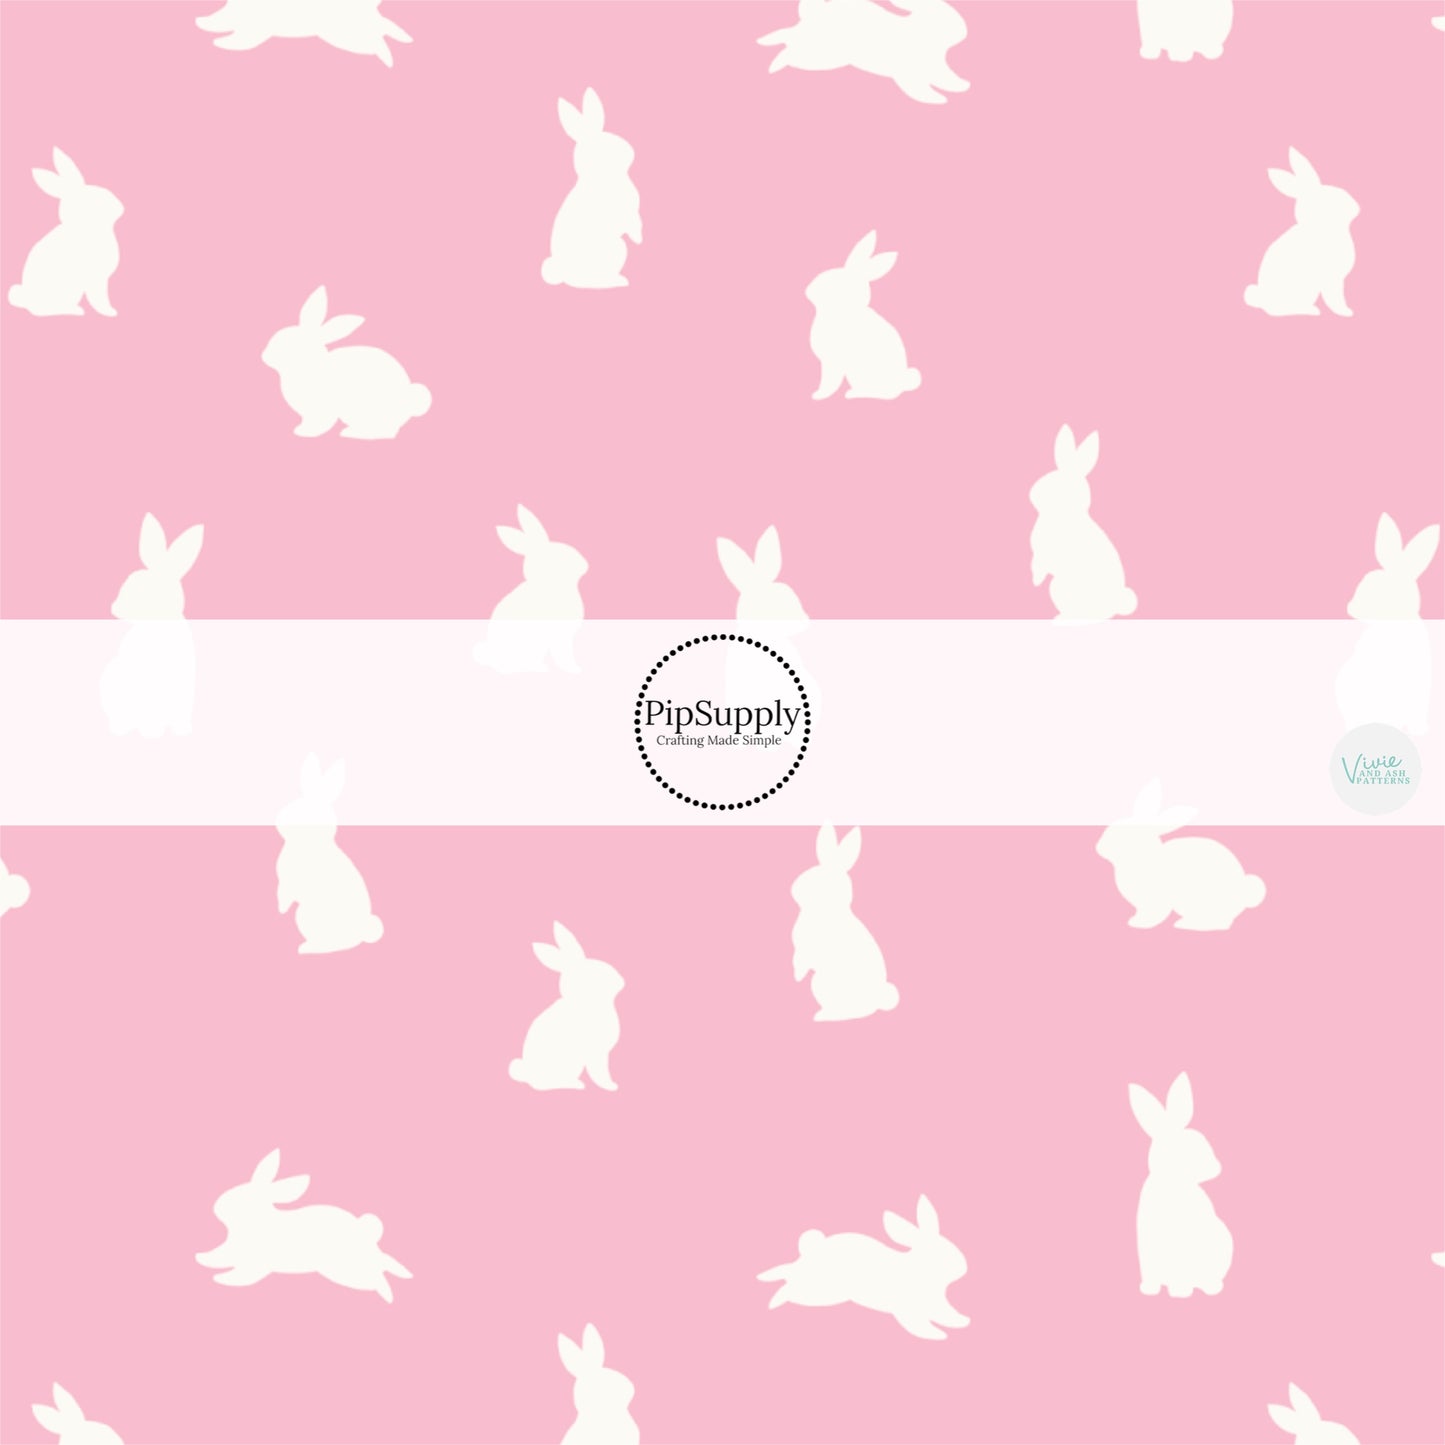 These spring patterned headband kits are easy to assemble and come with everything you need to make your own knotted headband. These kits include a custom printed and sewn fabric strip and a coordinating velvet headband. This cute pattern features cream bunnies on light pink. 